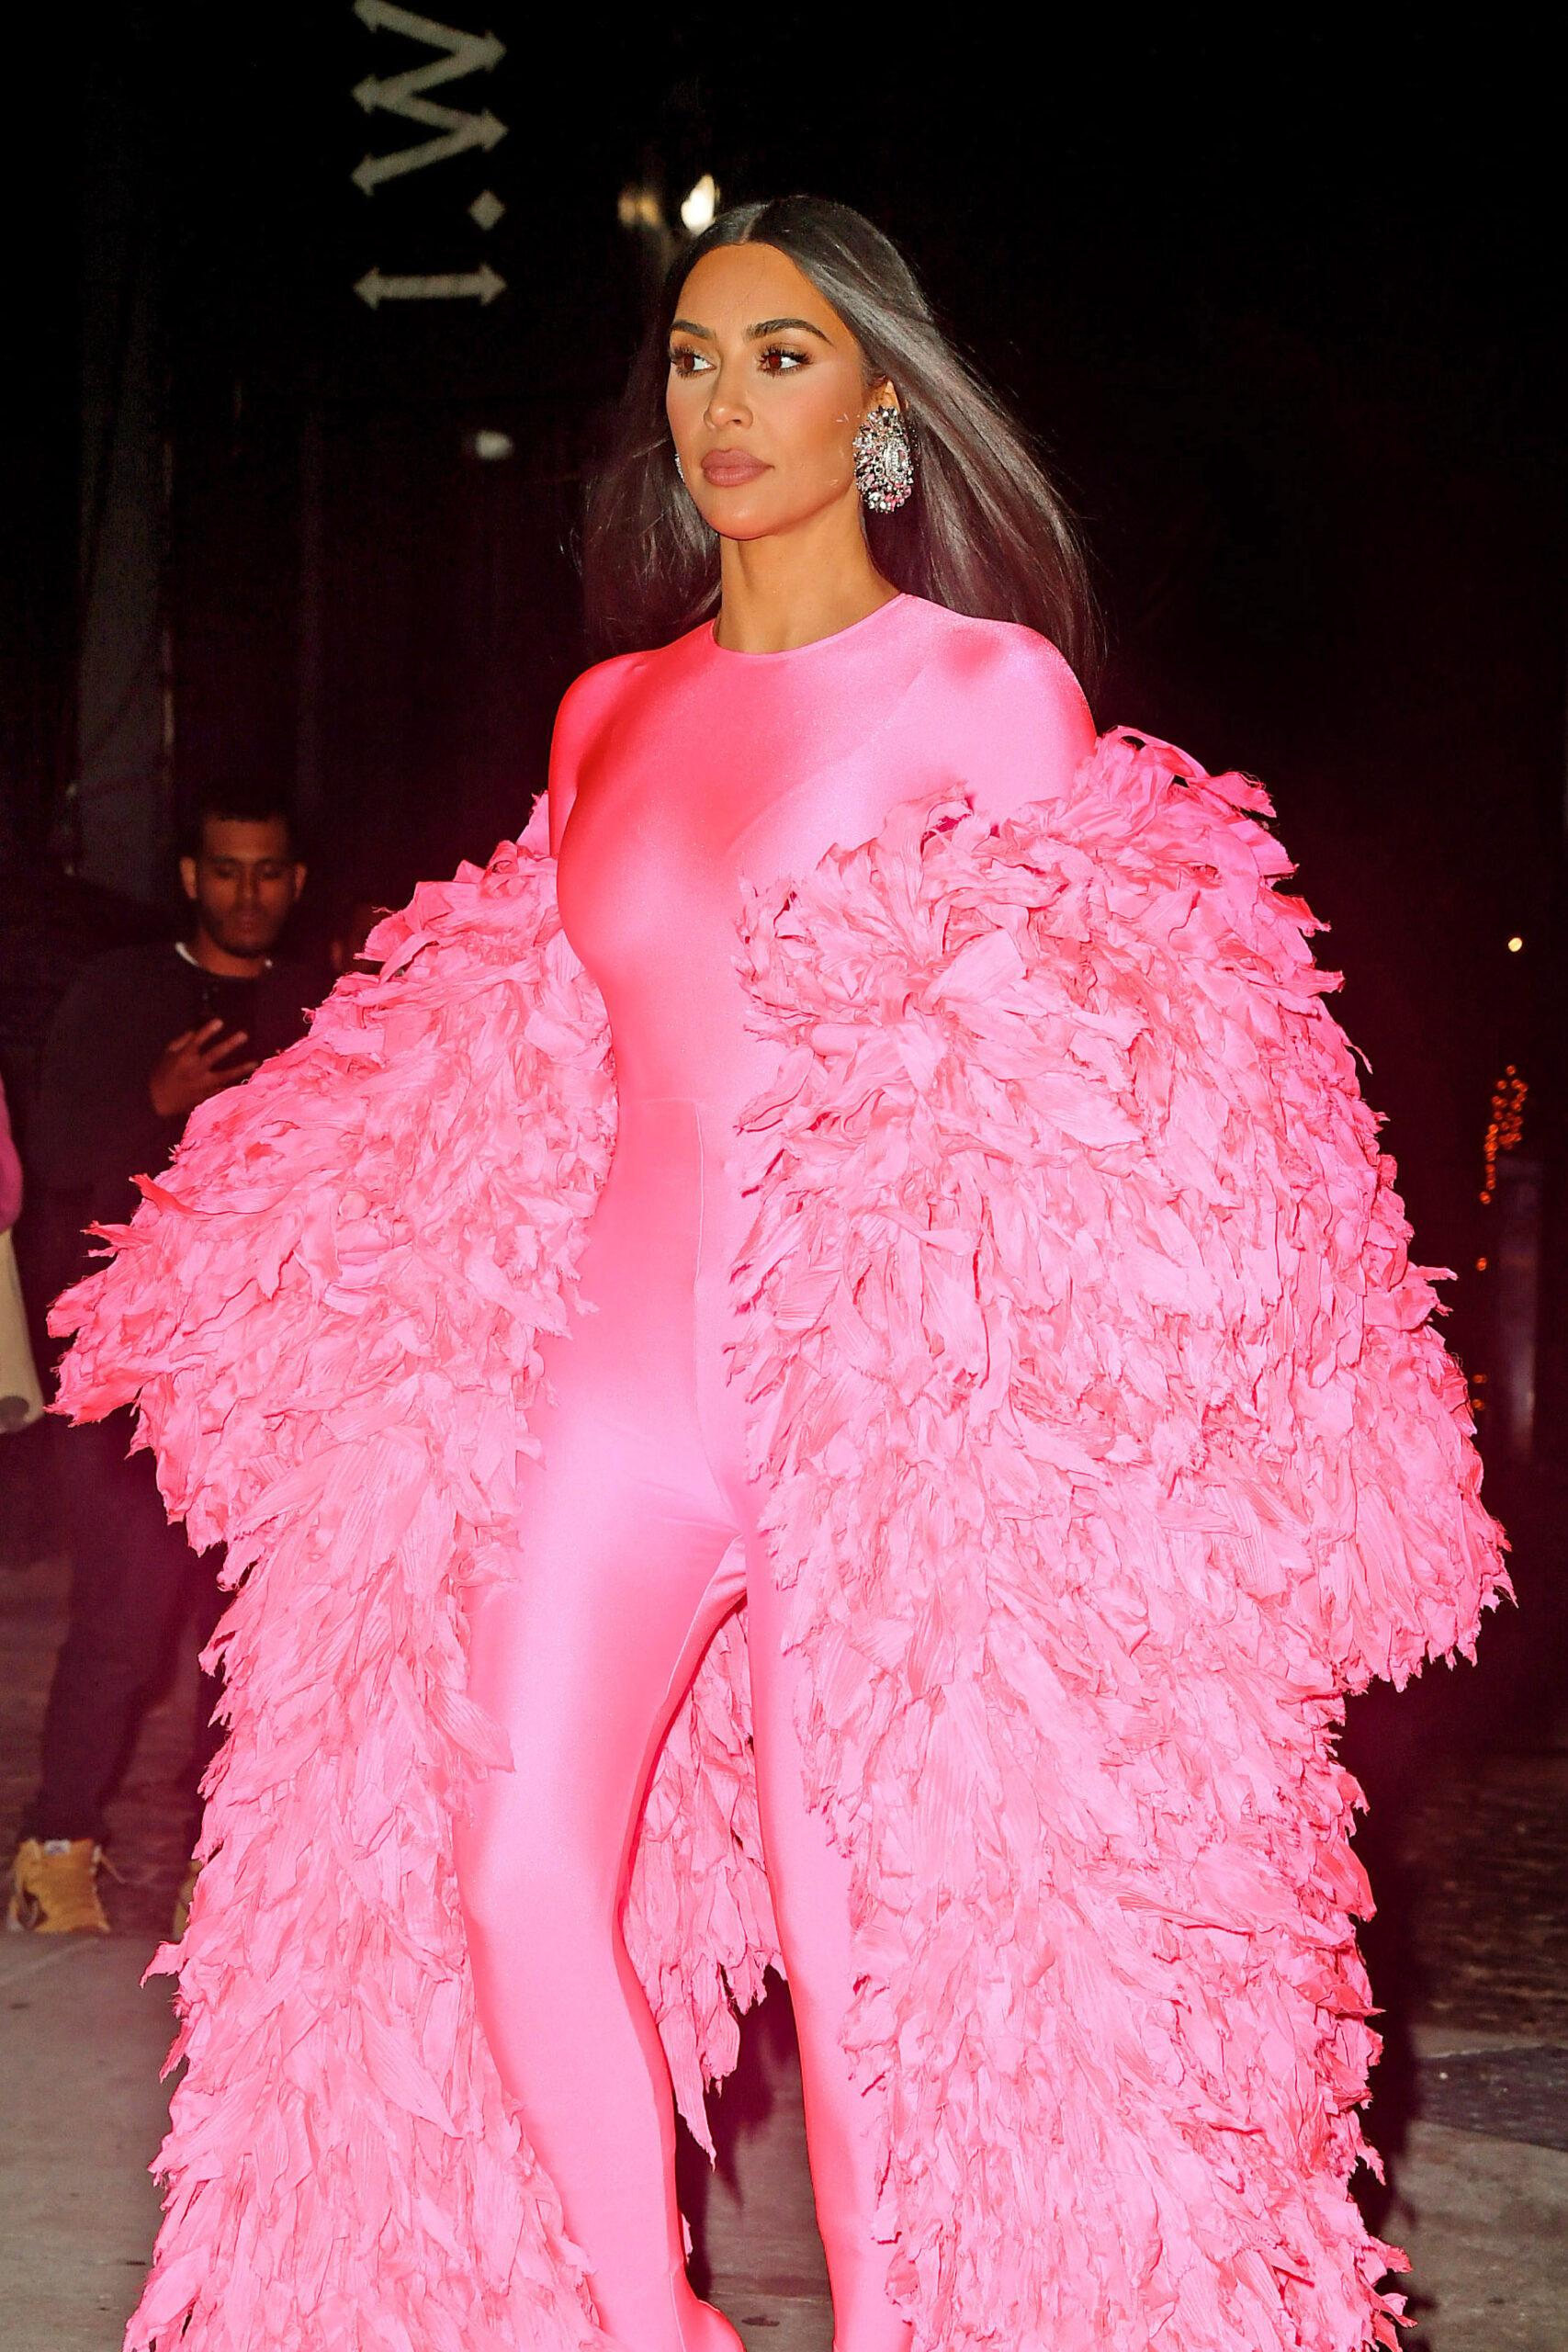 Kim Kardashian West arrives to the SNL after party in an all pink Balenciaga